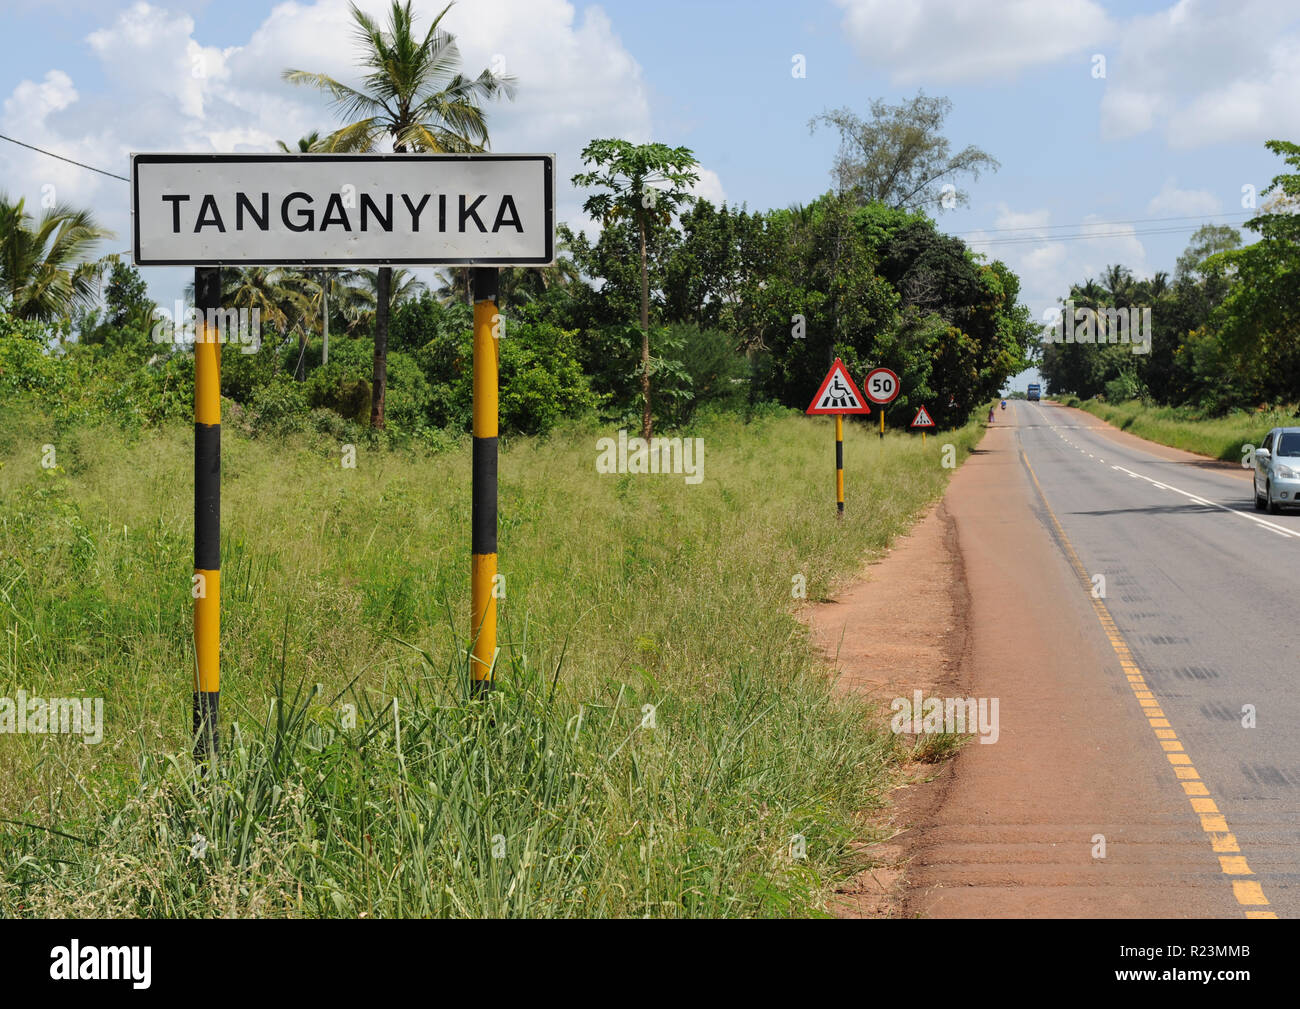 Tanganyika, Tanzania before independence, is now name of new